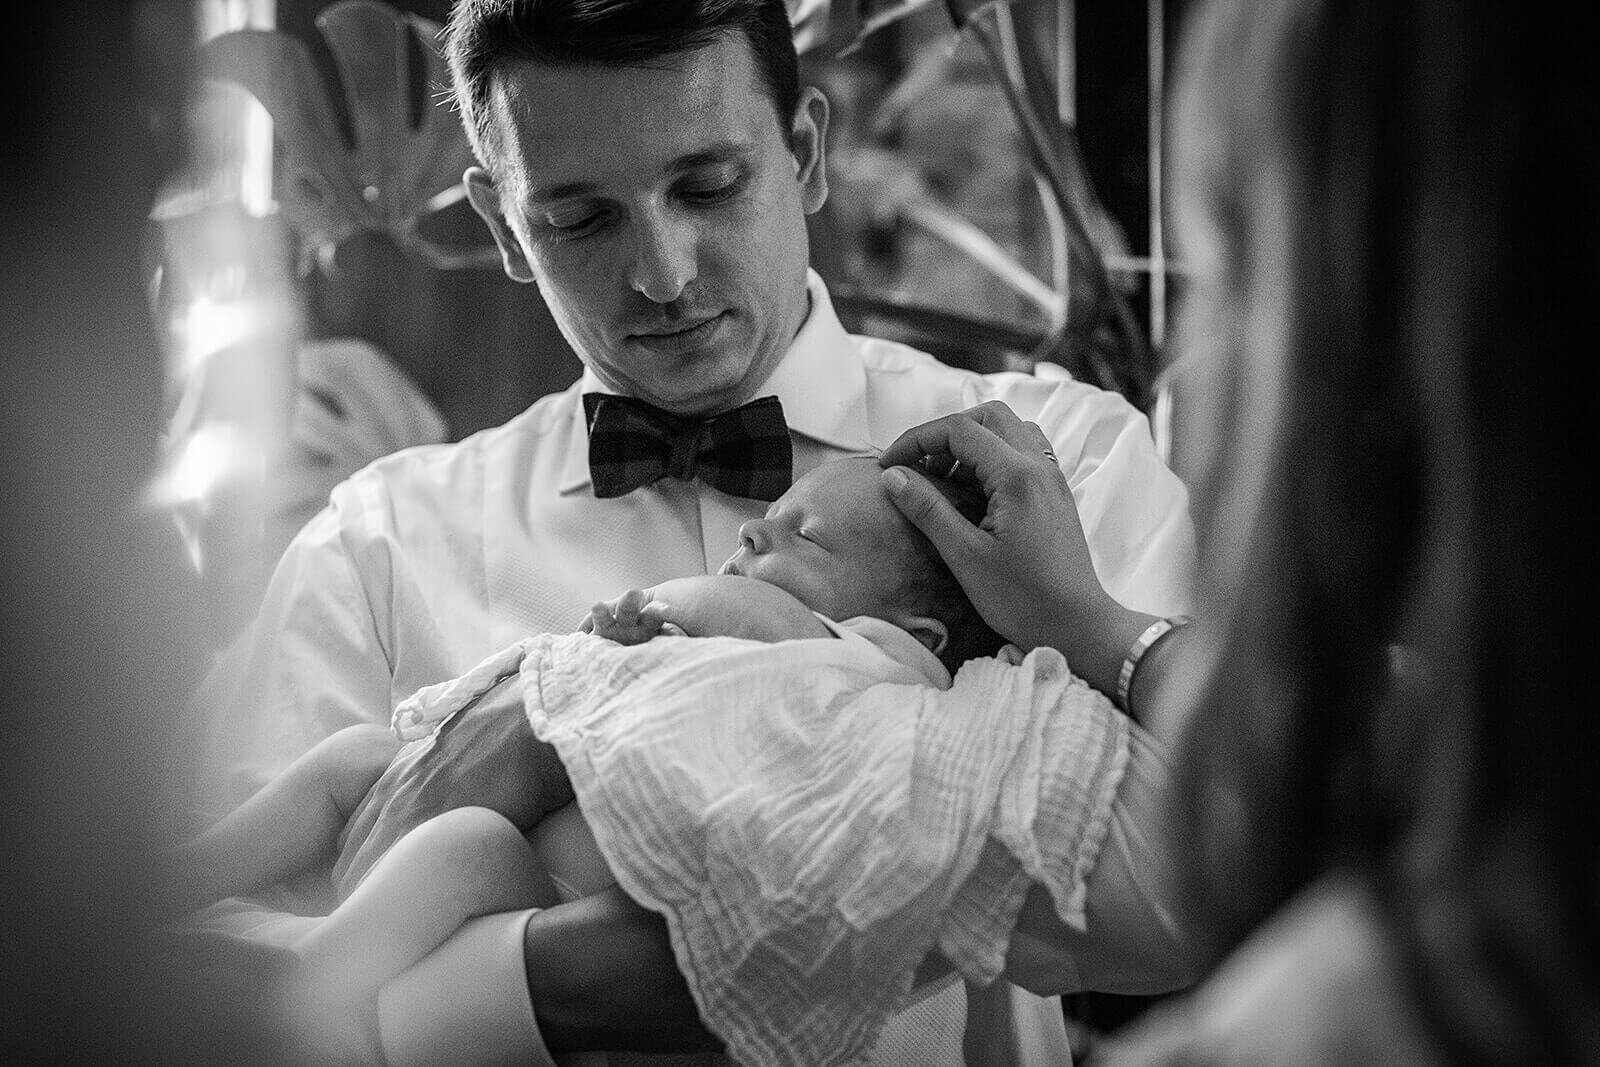 Groom holds baby in his arms at London wedding reception